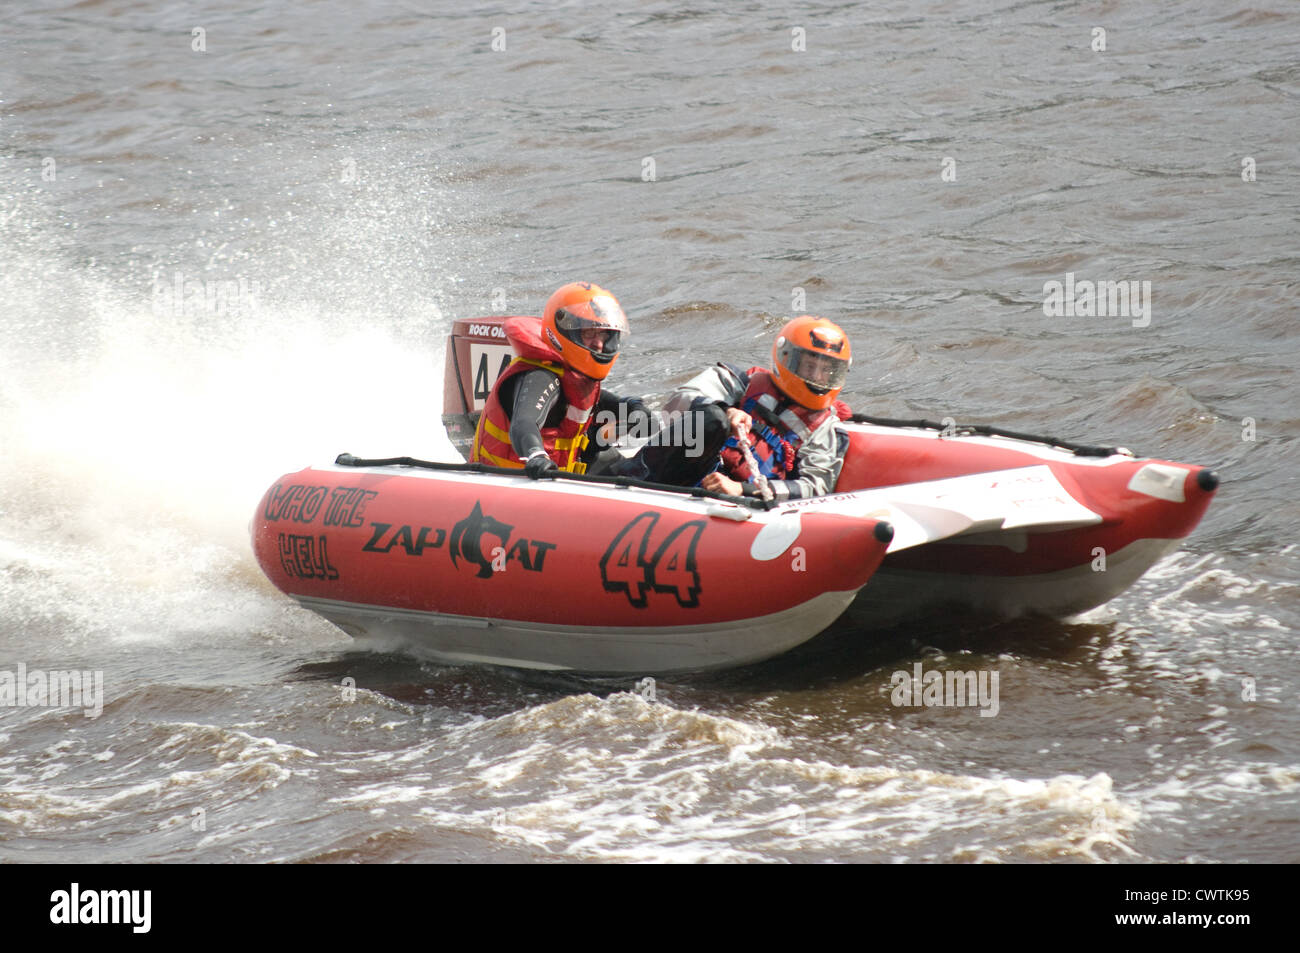 Powerboat racing returns to the River Tyne with a two day Zapcat meeting sponsored by NE1 Stock Photo